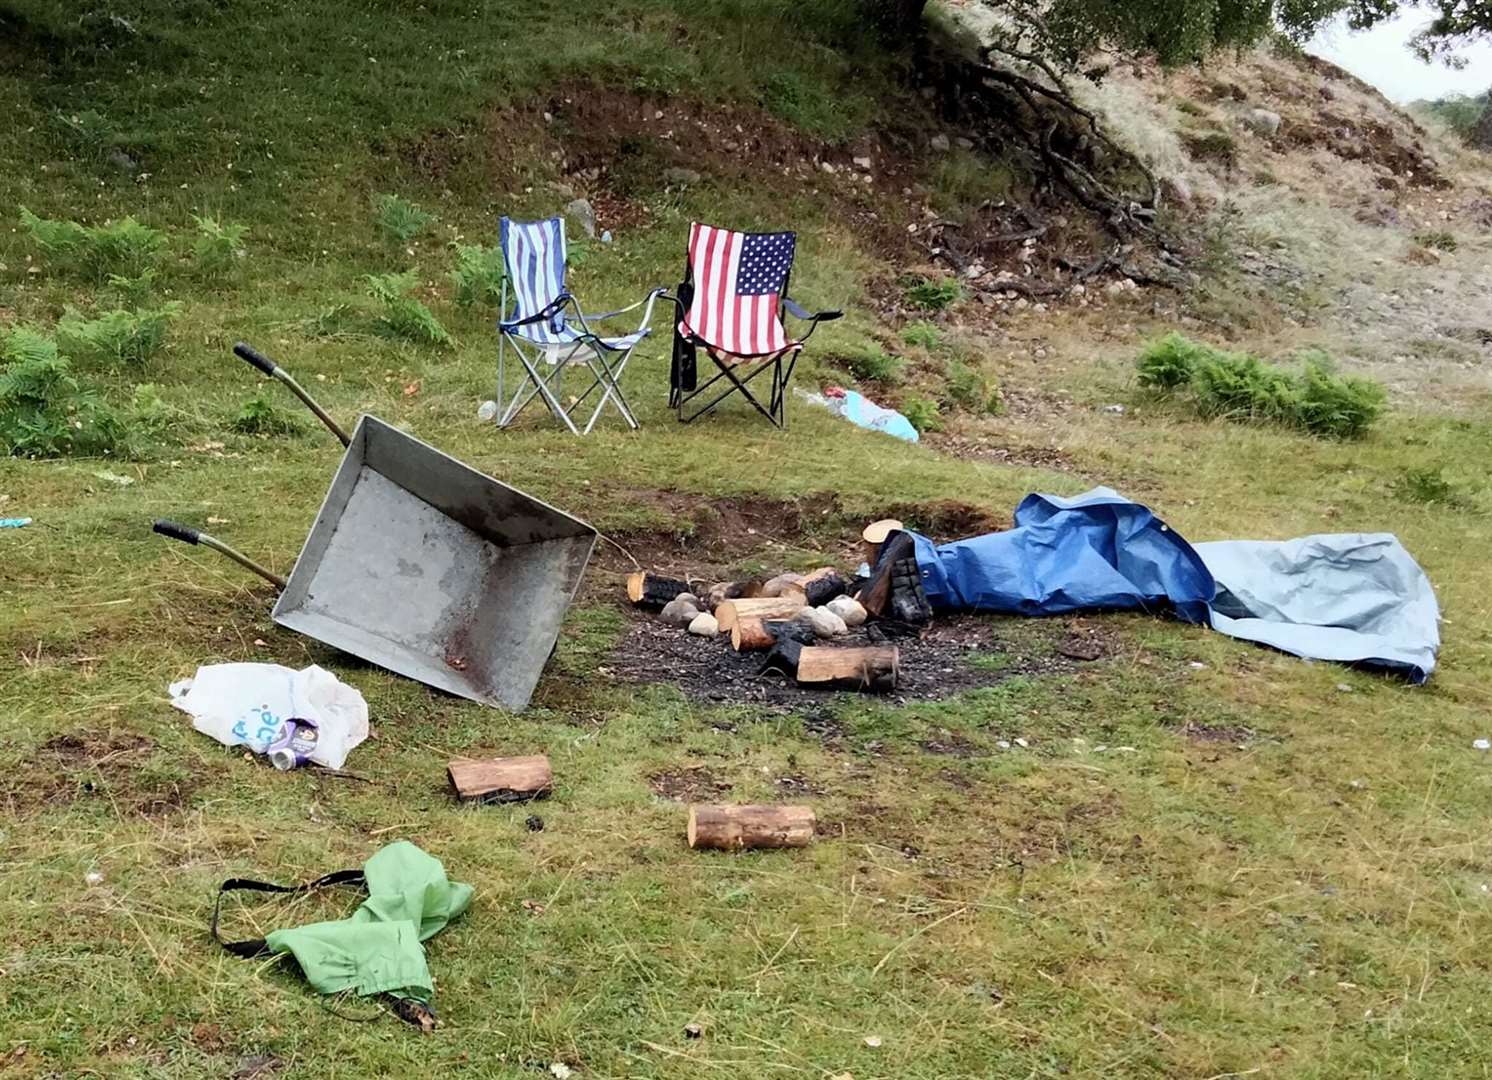 Dirty camping can be one consequence of high visitor pressures in rural parts of the Highlands